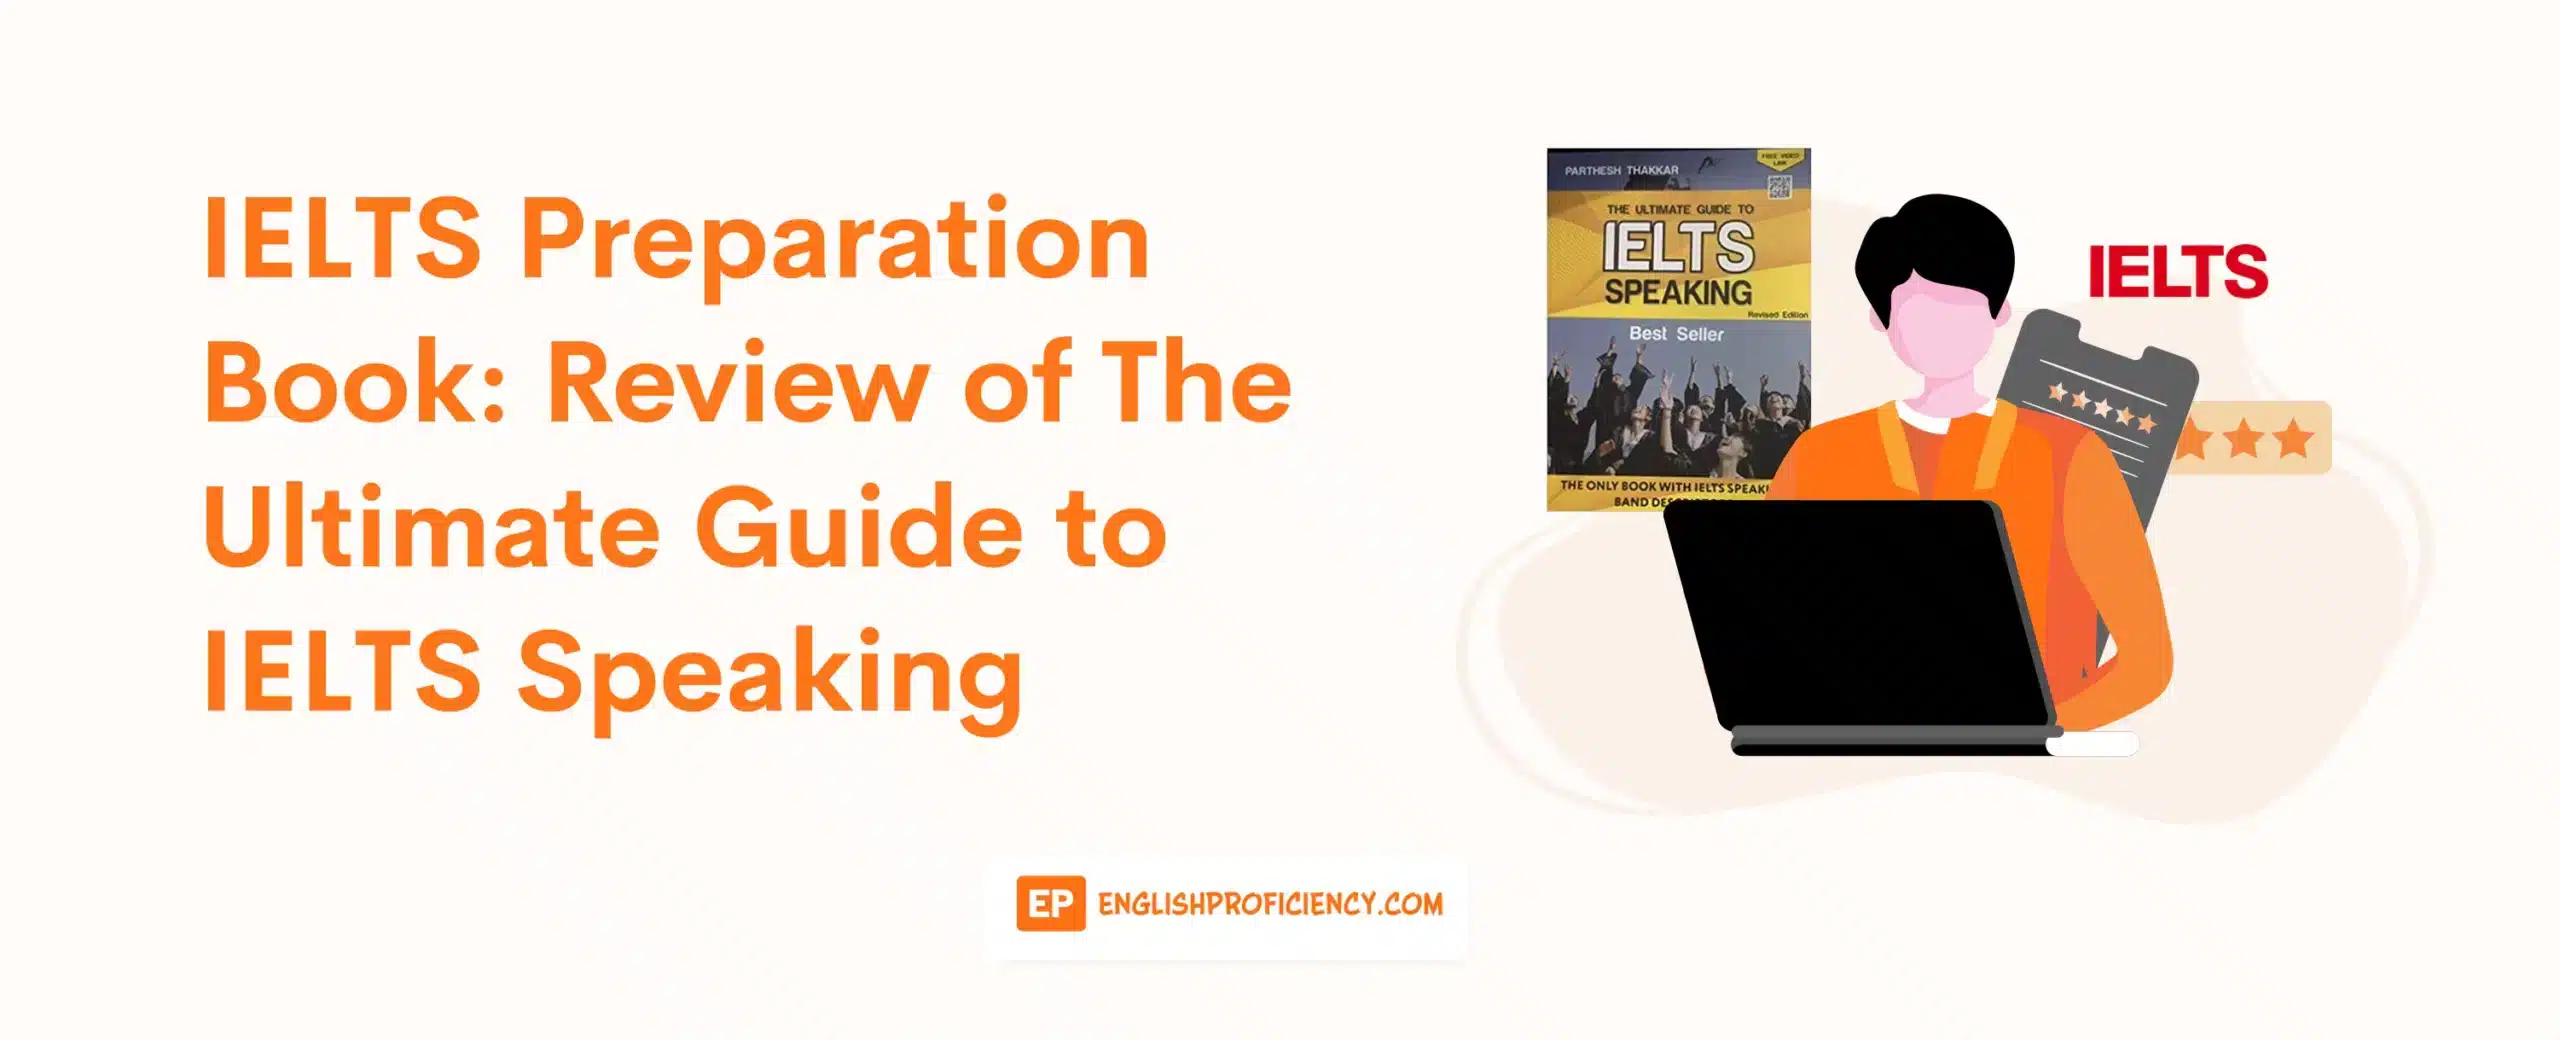 IELTS Preparation Book Review of The Ultimate Guide to IELTS Speaking